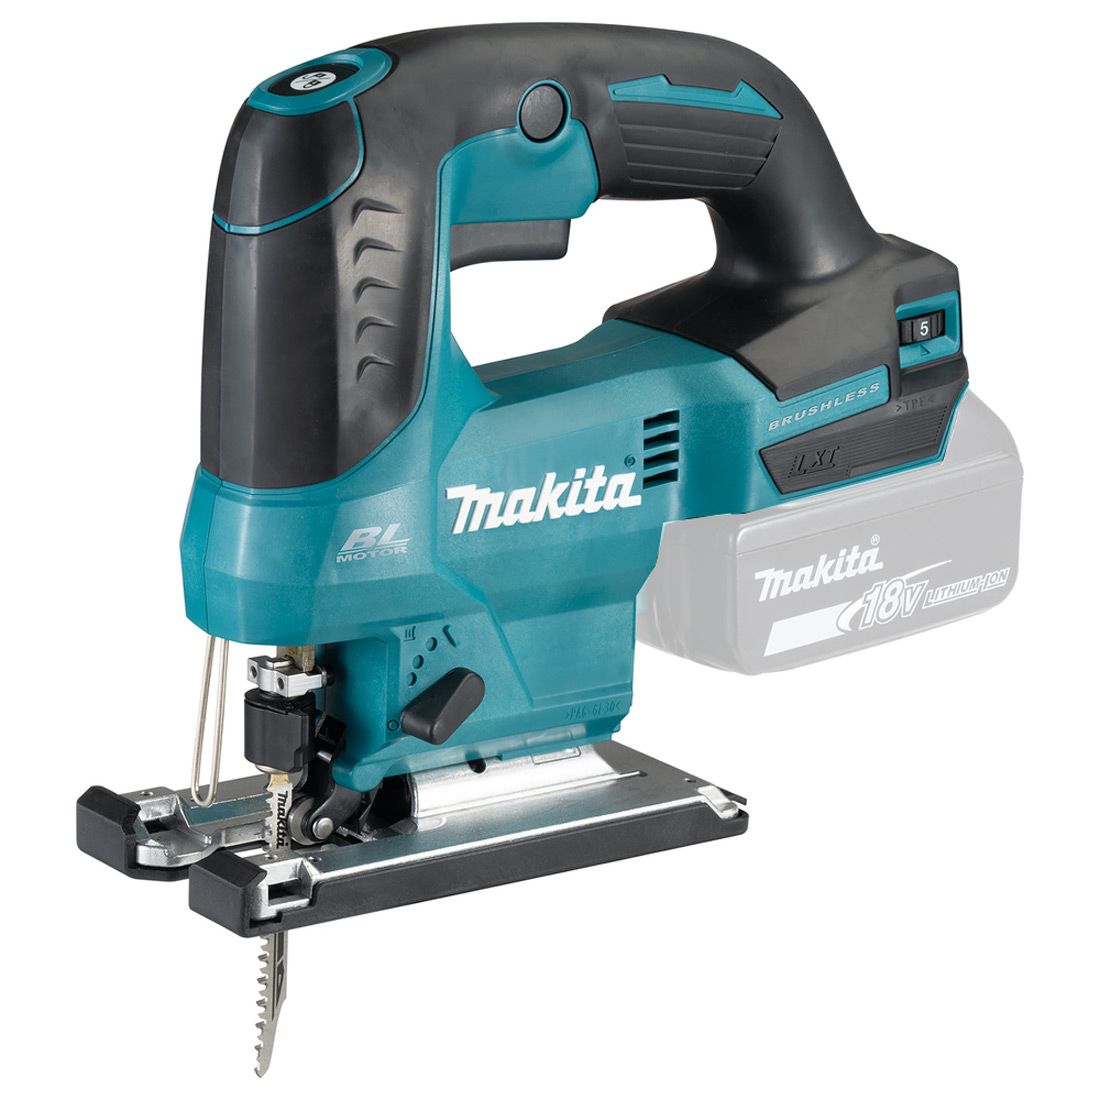 Makita 18v Brushless Compact Jigsaw Top Handle - DJV184Z - Body Only